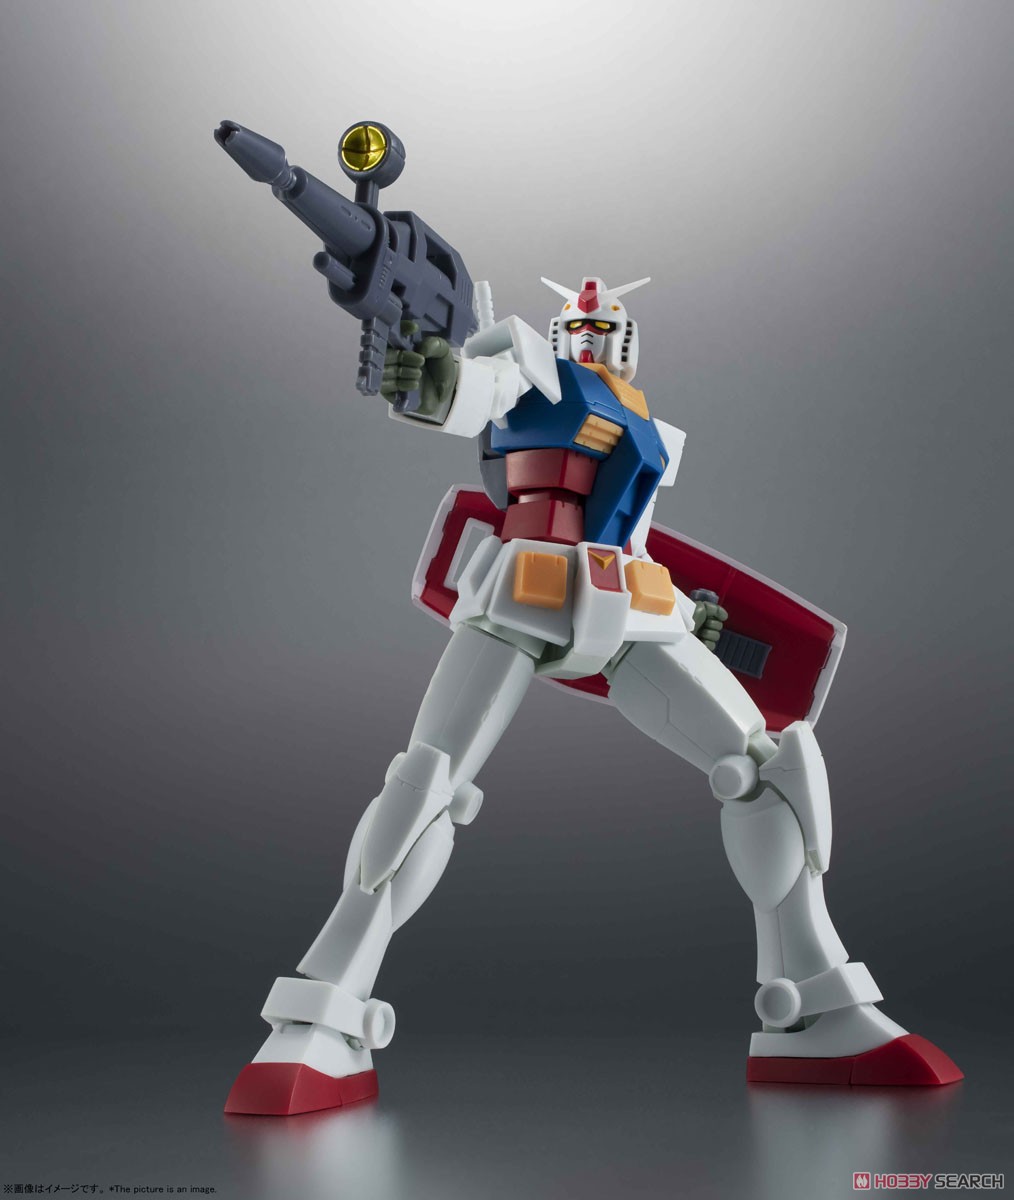 ROBOT魂 ＜ SIDE MS ＞ RX-78-2 ガンダム ver. A.N.I.M.E. [BEST SELECTION] (完成品) 商品画像3